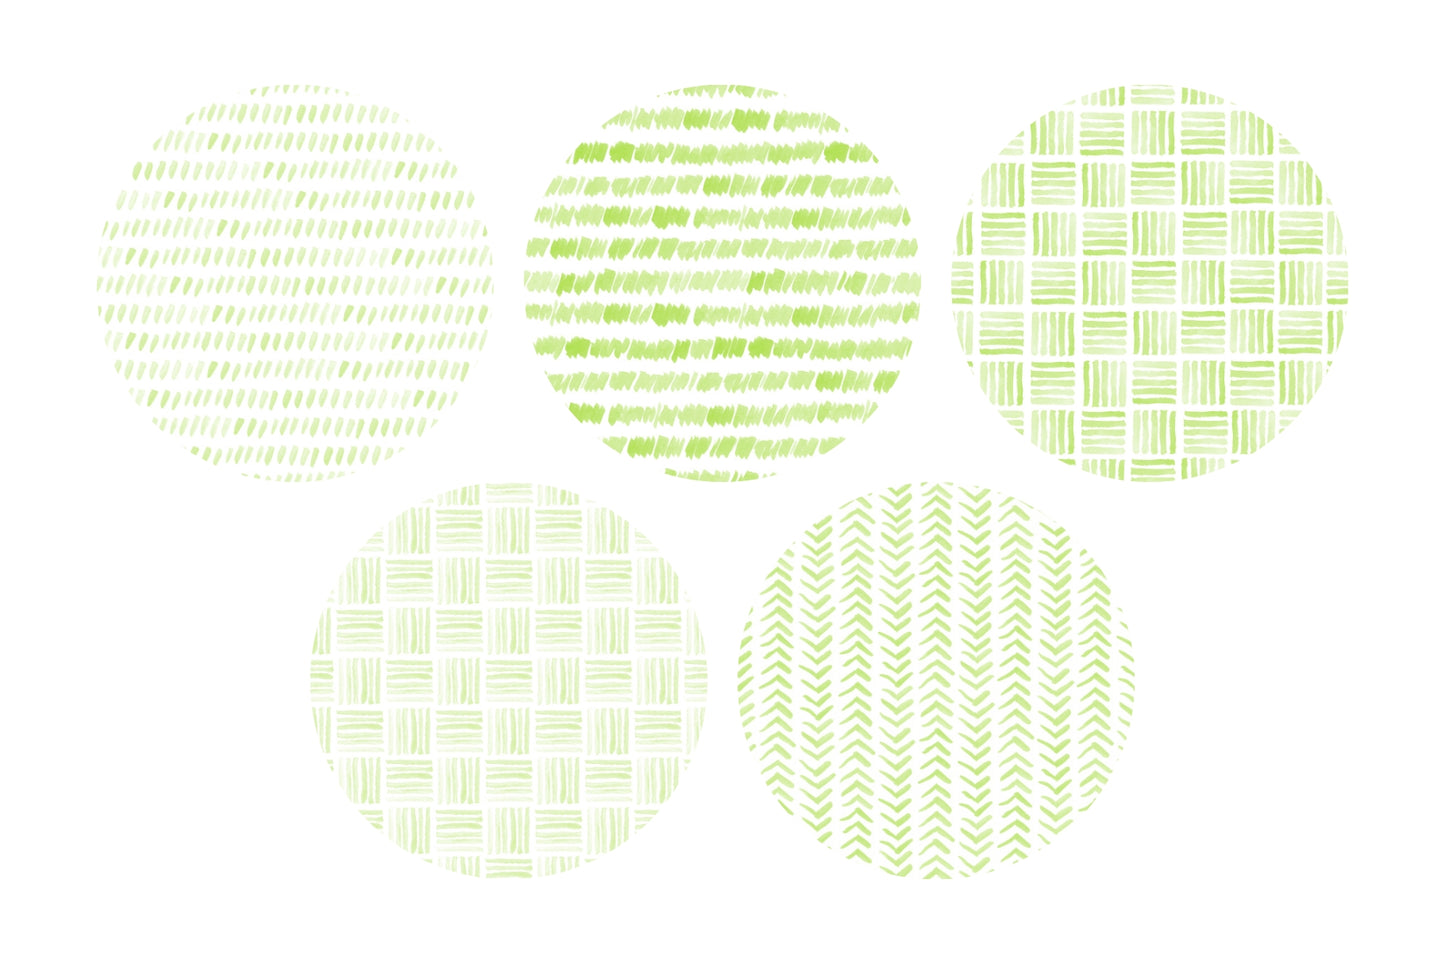 Watercolor Patterns 01 Green Watercolor Seamless Patterns